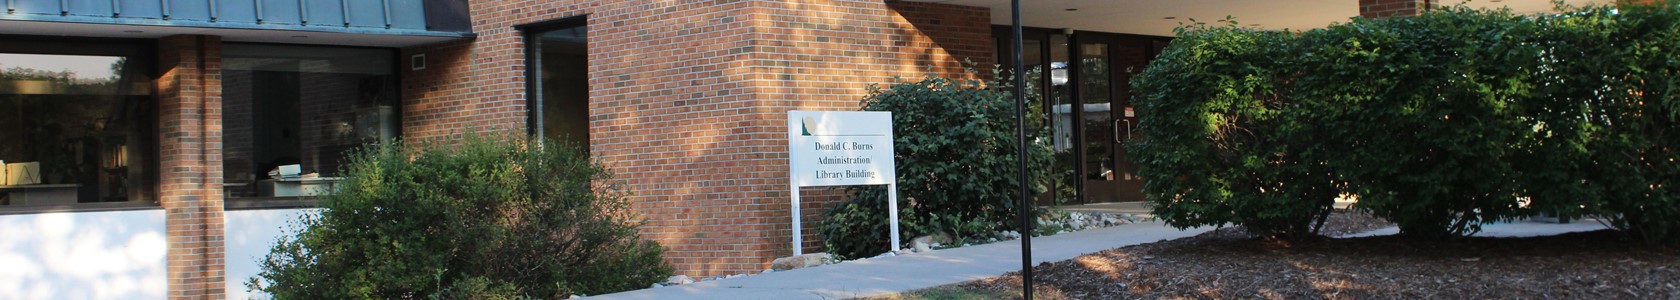 ɫ's Sidney campus, Donald C. Burn Administration/Library Building